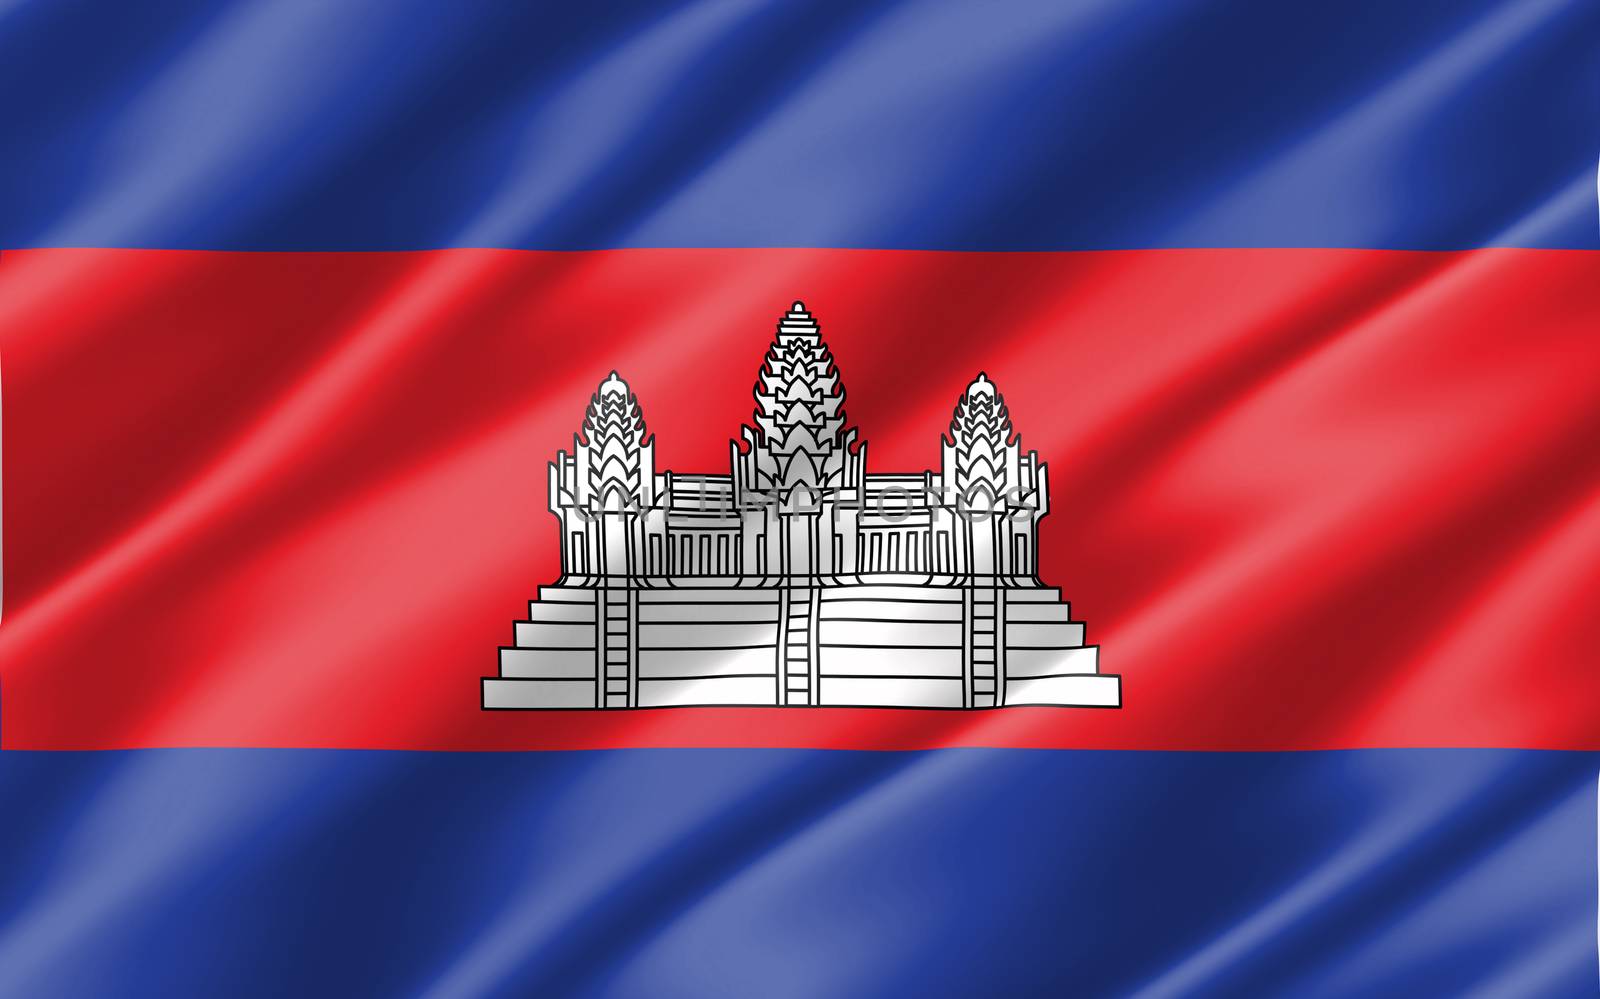 Silk wavy flag of Cambodia graphic. Wavy Cambodian flag illustration. Rippled Cambodia country flag is a symbol of freedom, patriotism and independence. by Skylark